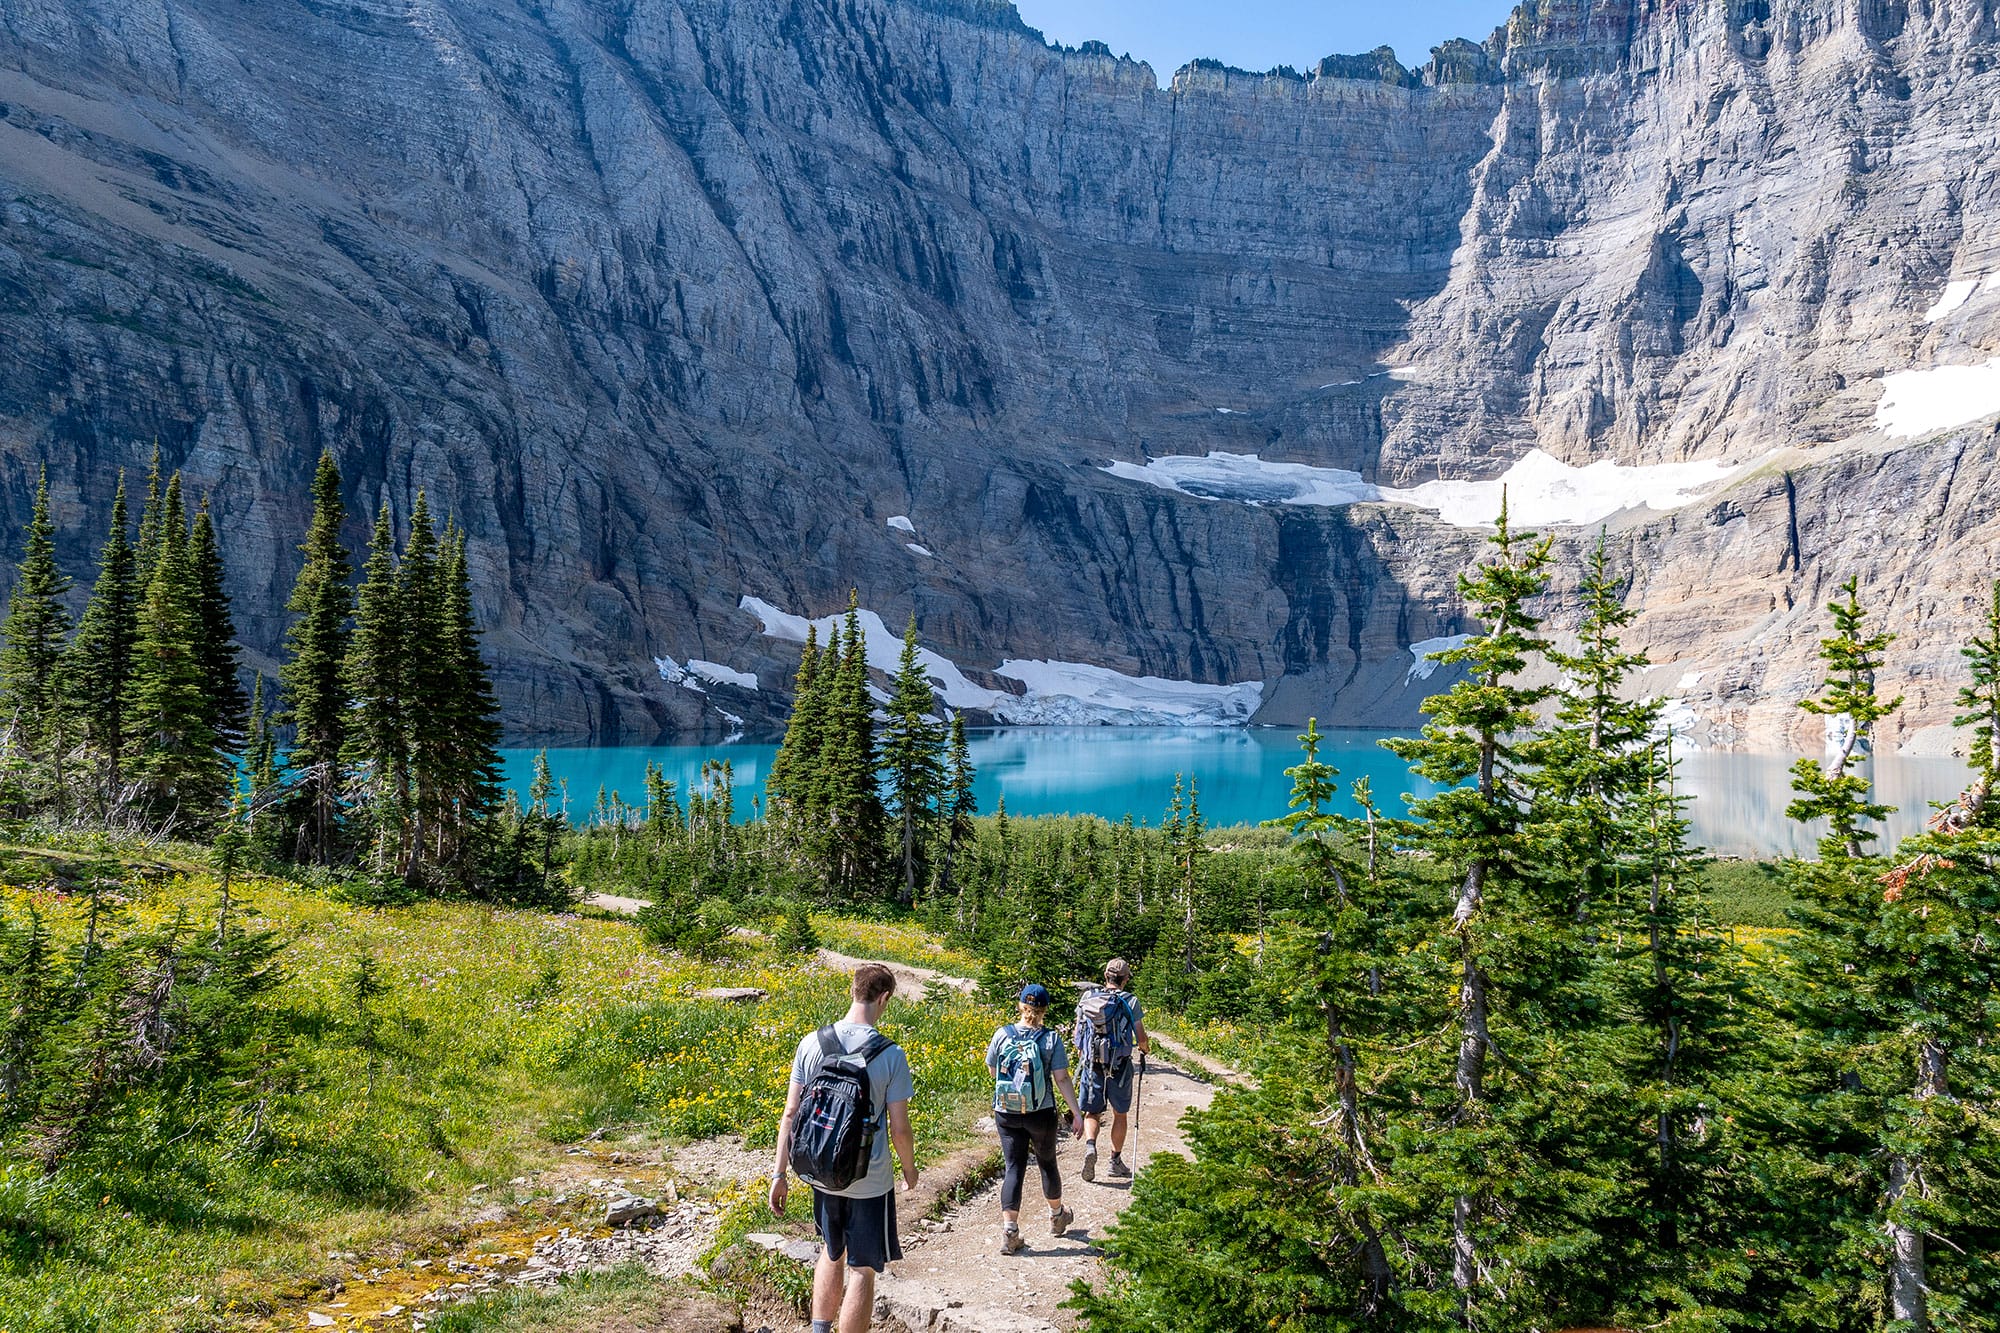 A group of visitors hike a trail in Glacier National Park.